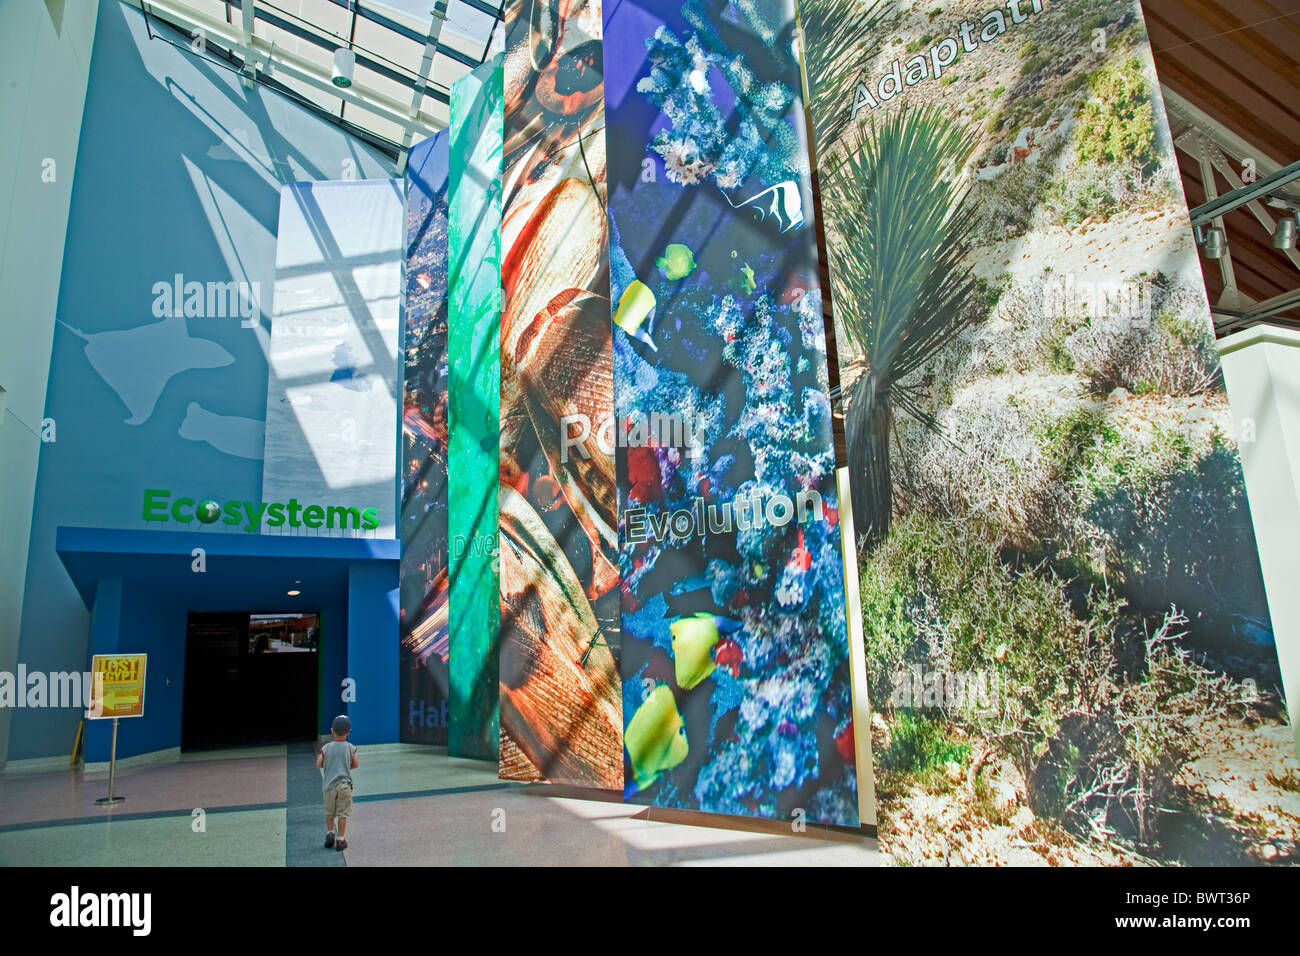 Ecosystems Exhibit at the California Science Center in Exposition Park. Los Angeles, California, USA Stock Photo